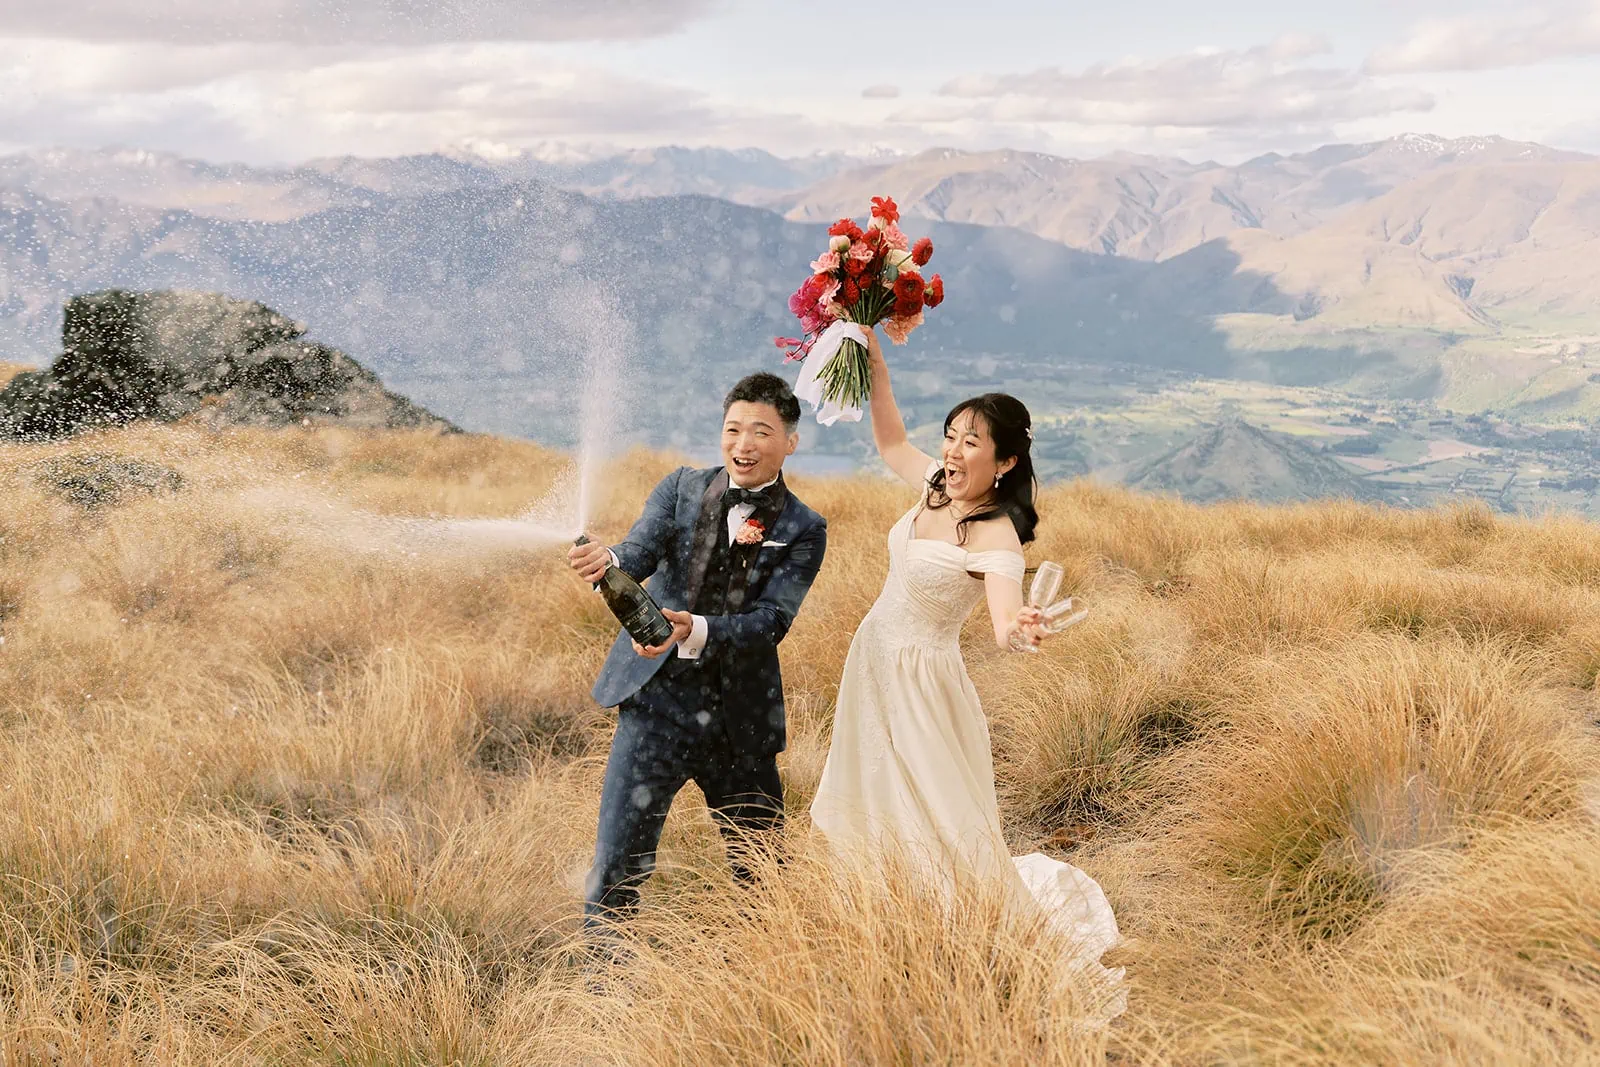 Queenstown Elopement Heli Wedding Photographer クイーンズタウン結婚式 | A bride and groom blowing bubbles during their pre-wedding photoshoot on top of a grassy hill in New Zealand.